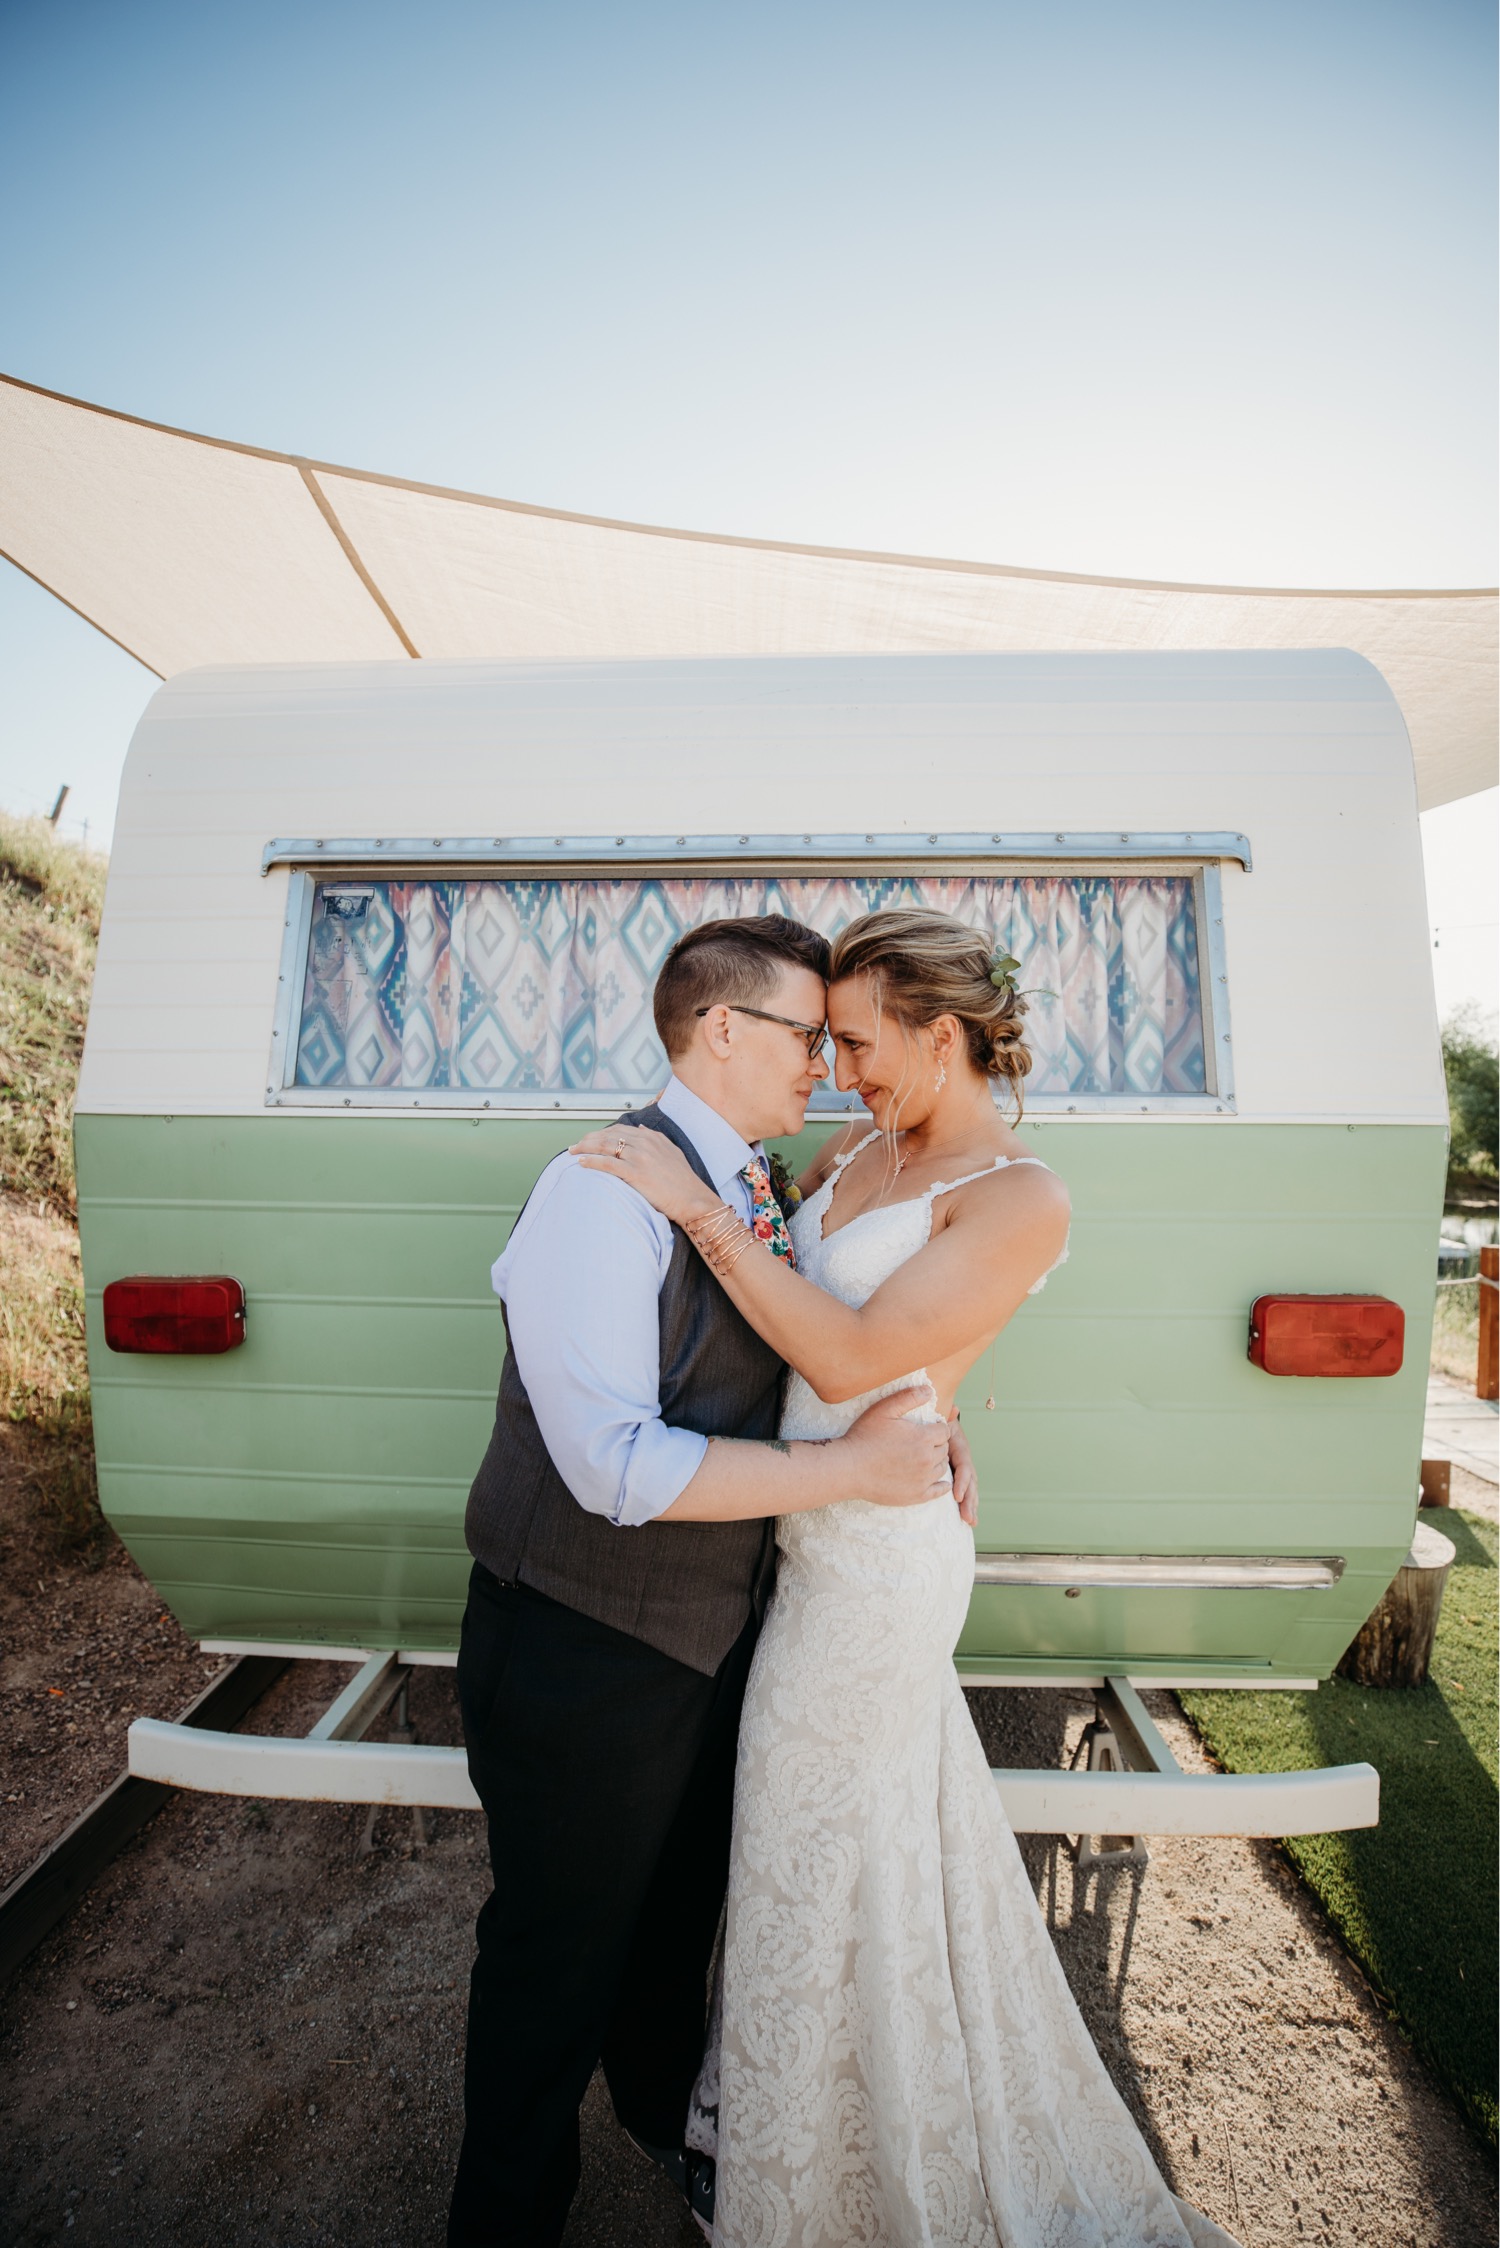 Brides embrace touching foreheads touching foreheads in front of a green and white trailer at their Paso Robles vineyard wedding reception. Liz Koston Photography.